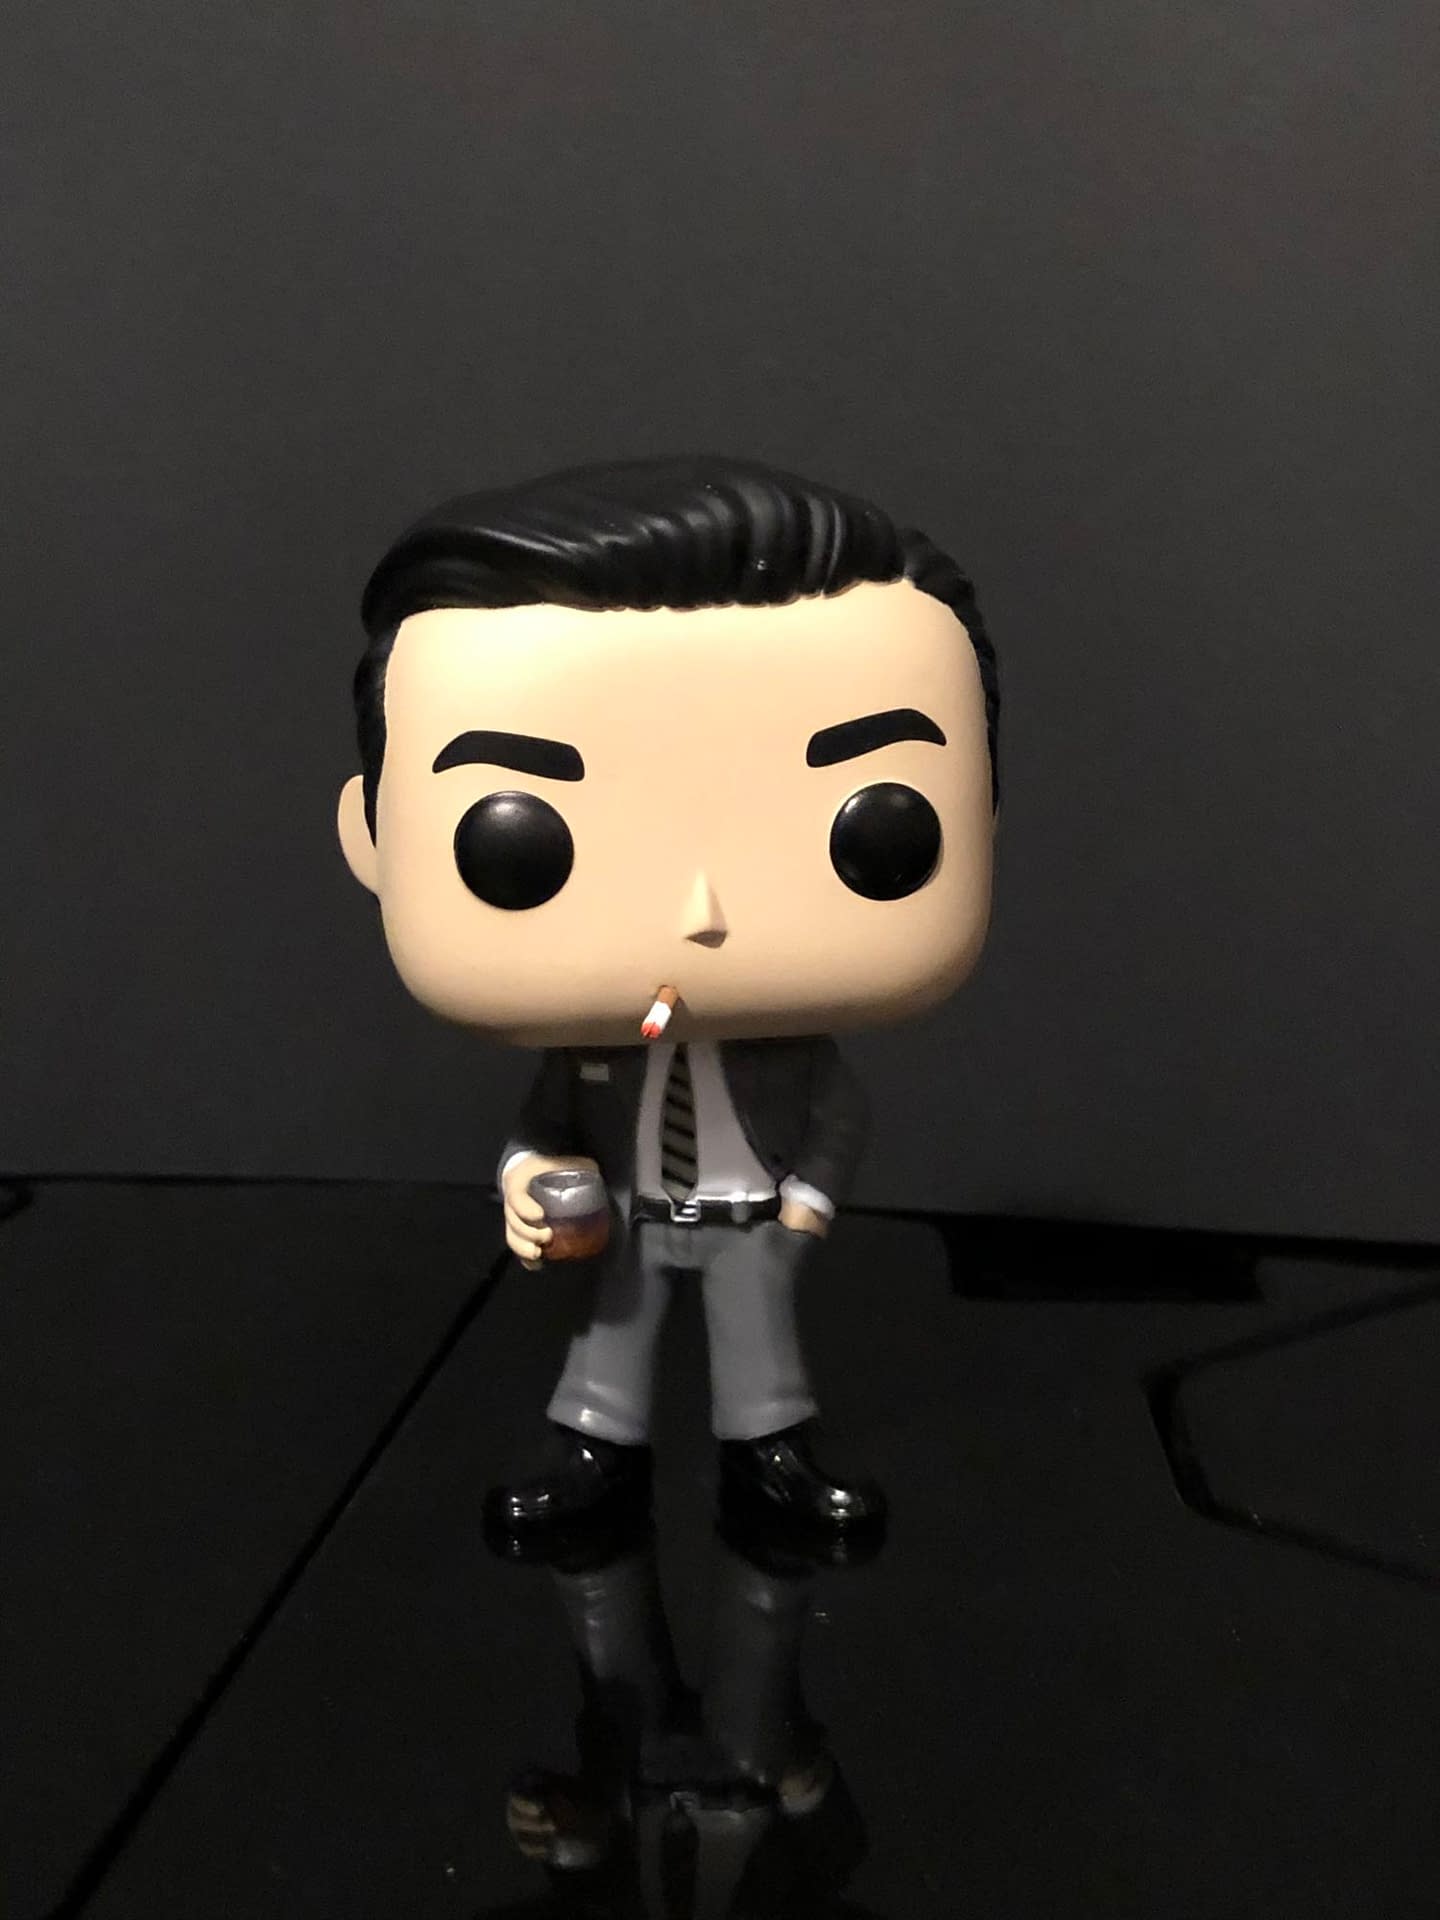 Mad Men Gets Funko Pops and Don Draper Has Arrived [Review]